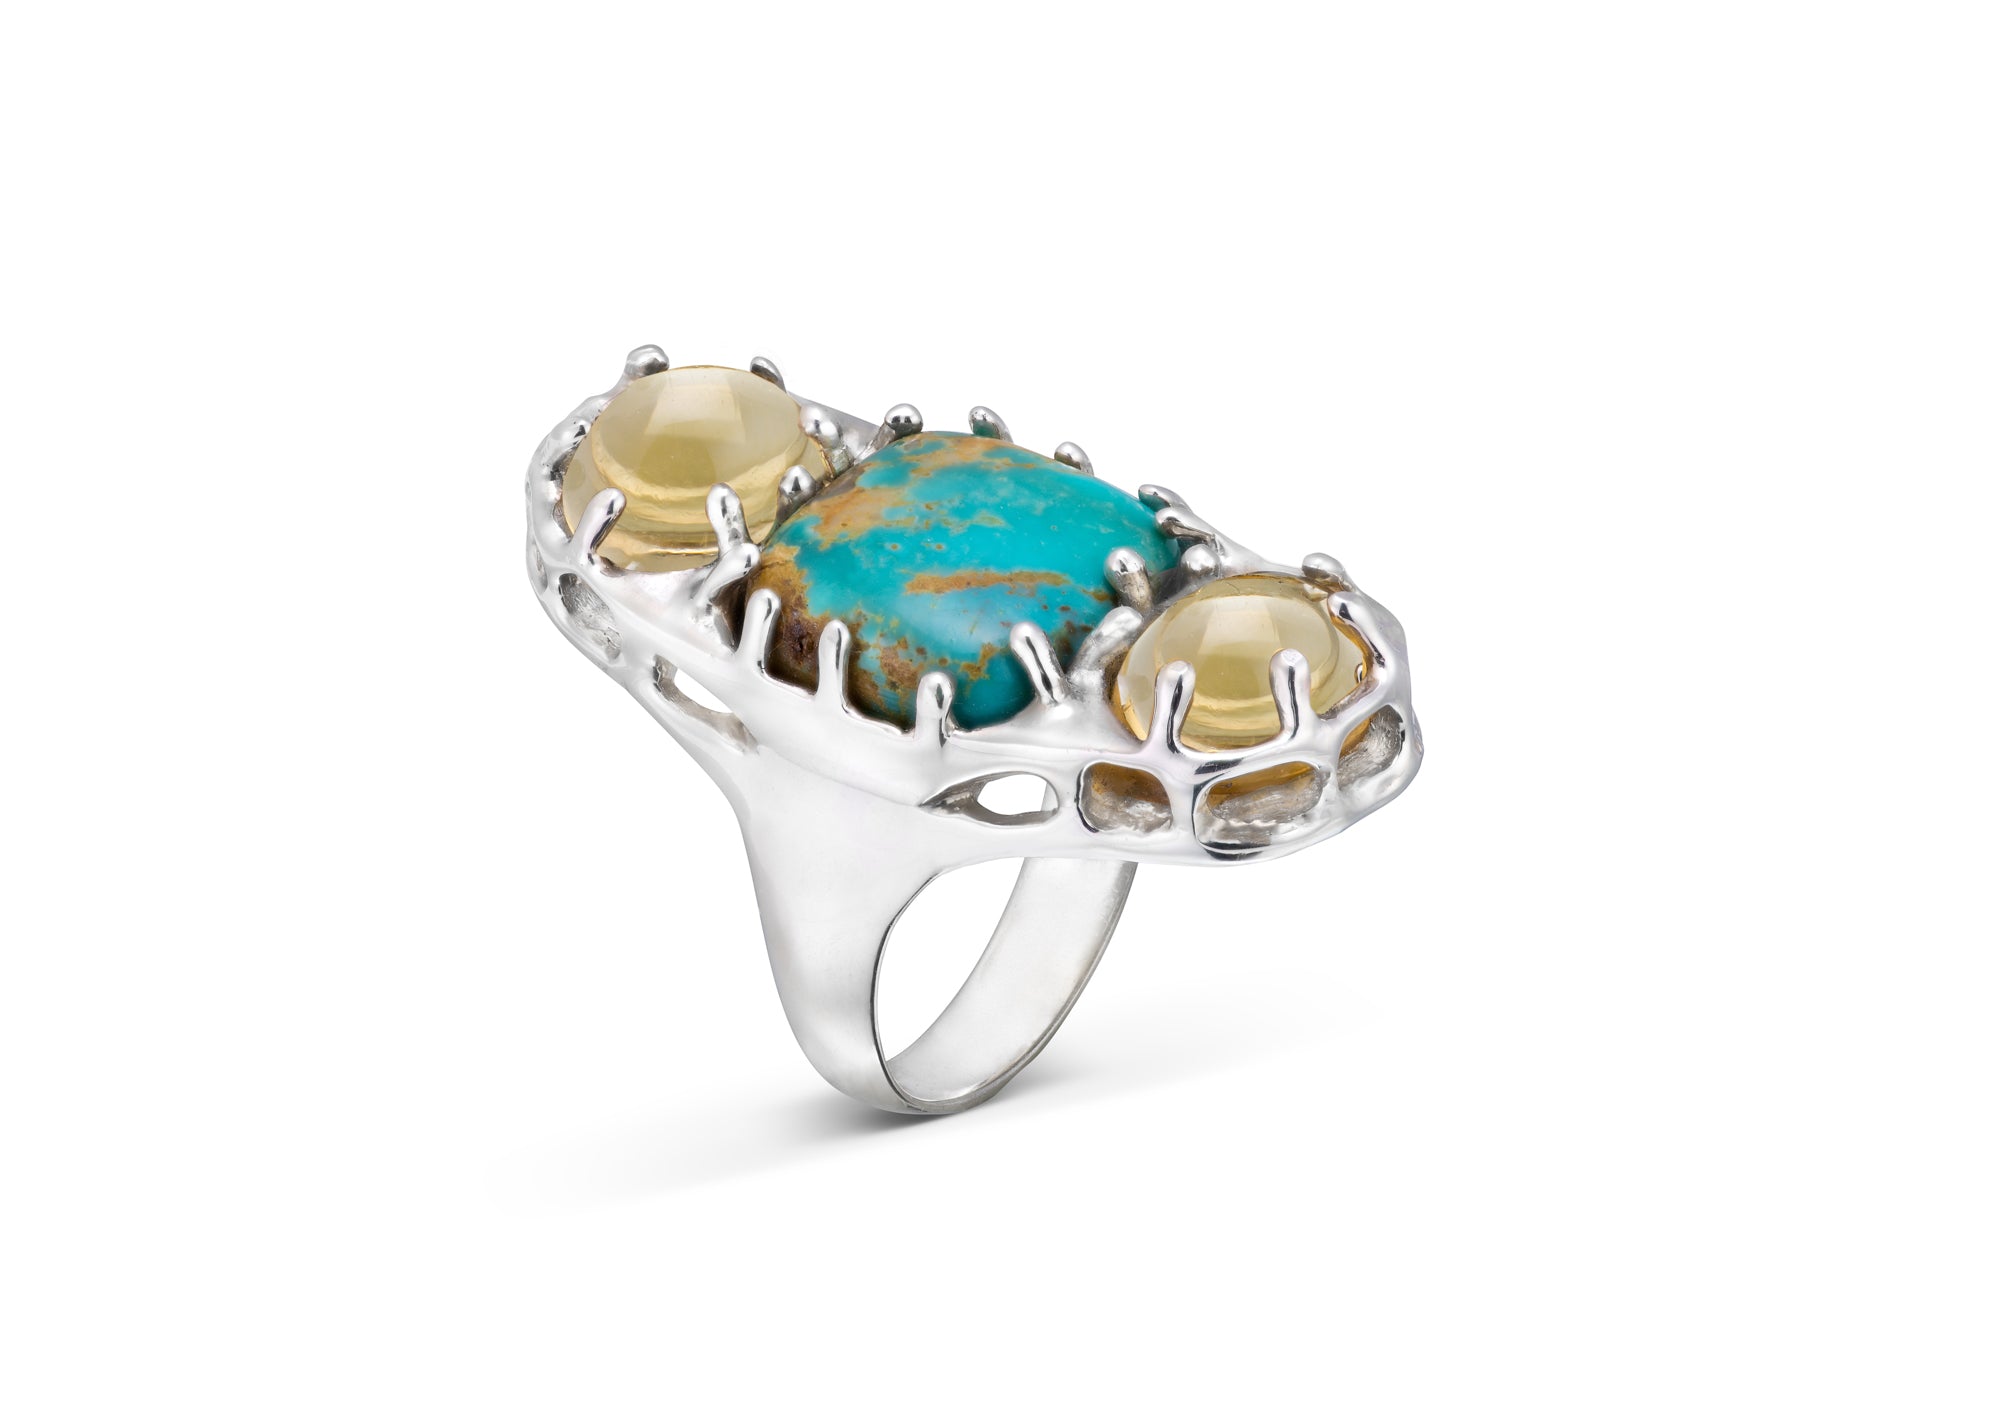 Dahna Ring Statement Lelamooi Golden Turquoise with Citrine 935 Sterling Silver  